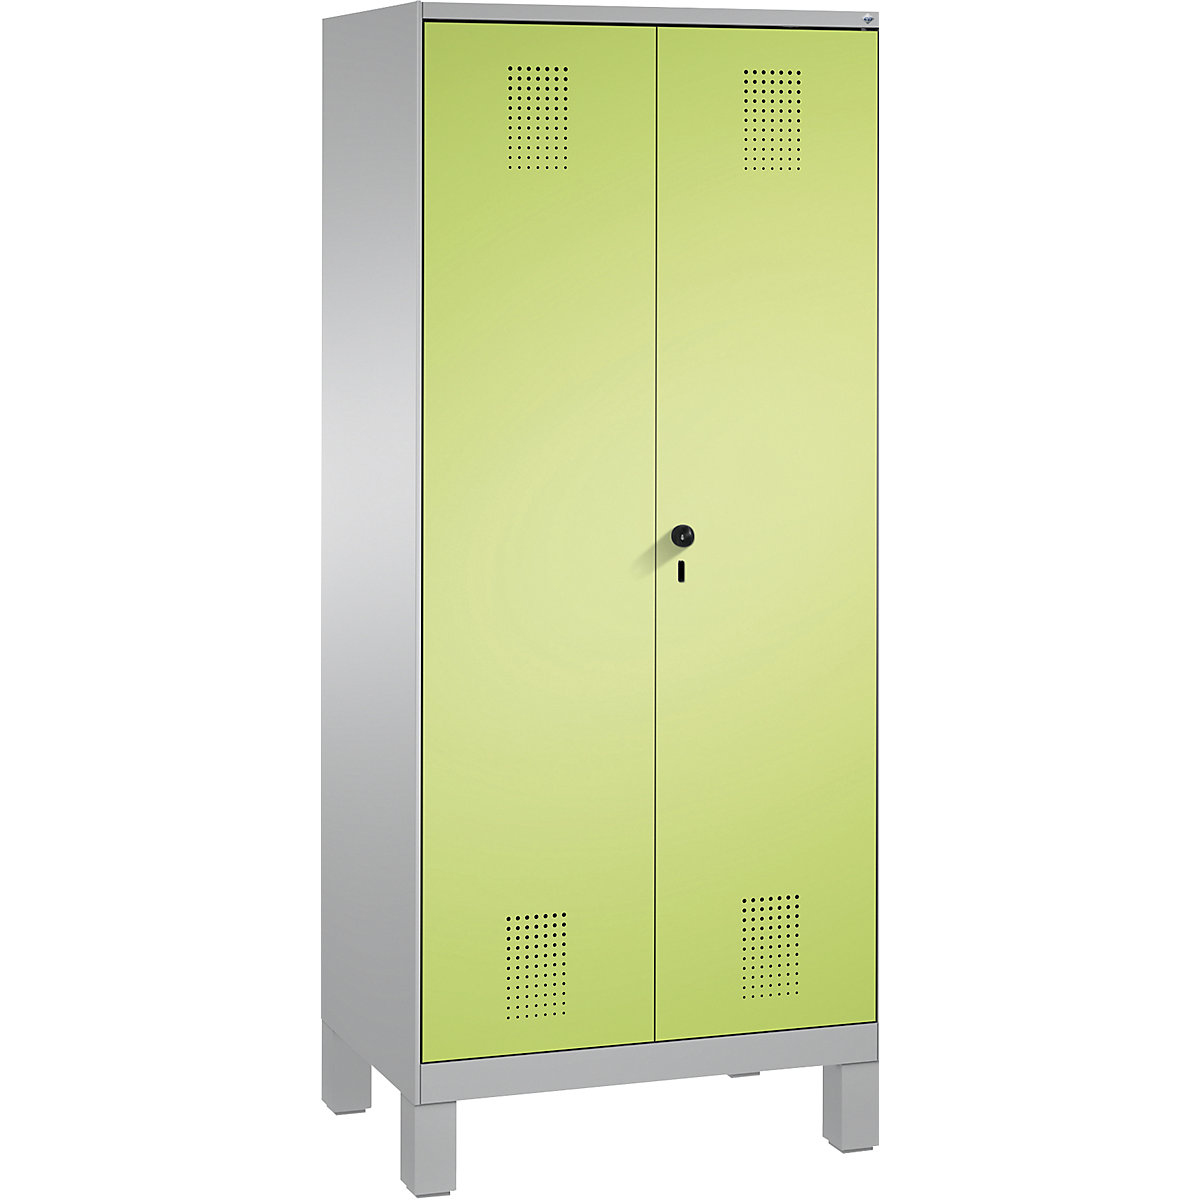 EVOLO cloakroom locker, doors close in the middle – C+P, 2 compartments, compartment width 400 mm, with feet, white aluminium / viridian green-10